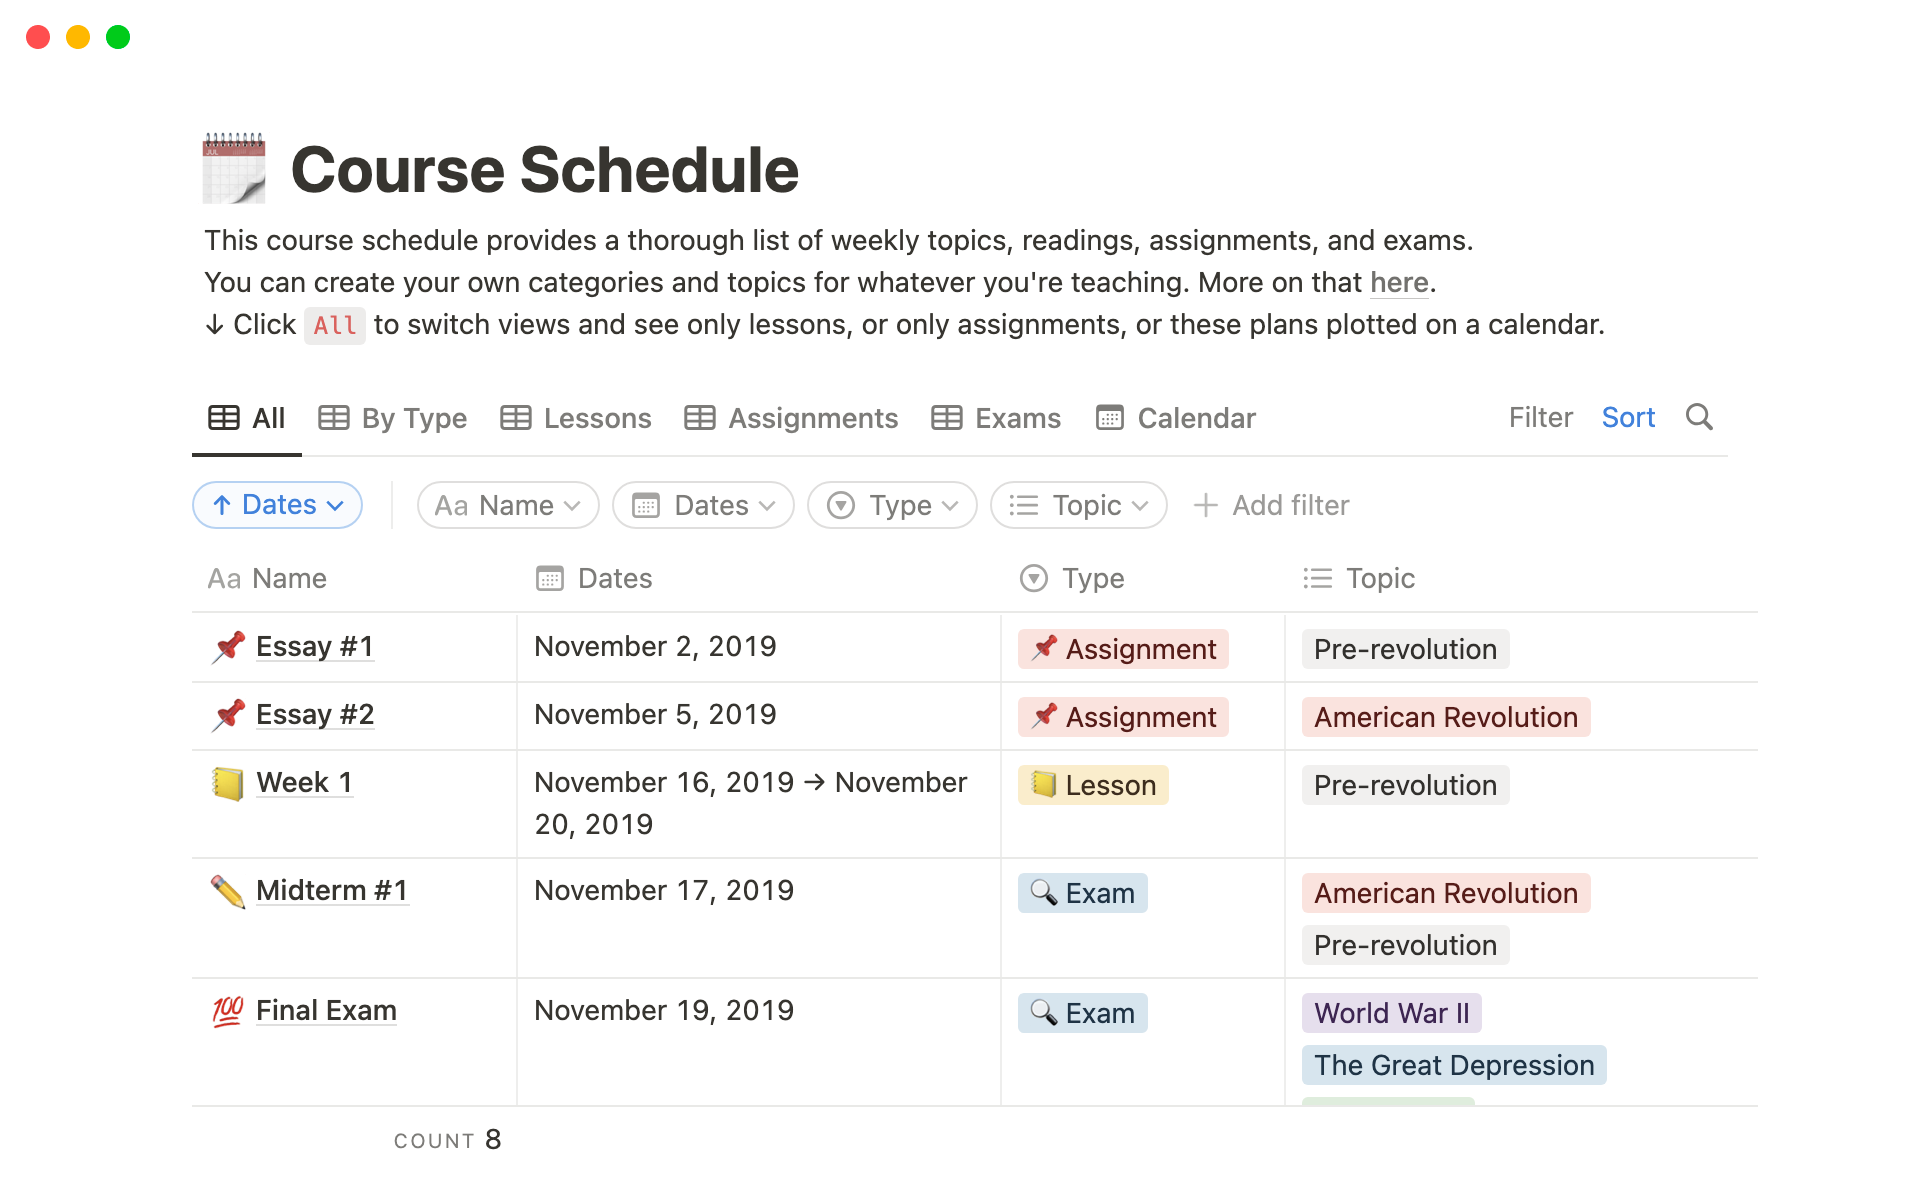 College Student Class Schedule Free Google Docs Template by Free Google  Docs Templates  gdocio on Dribbble